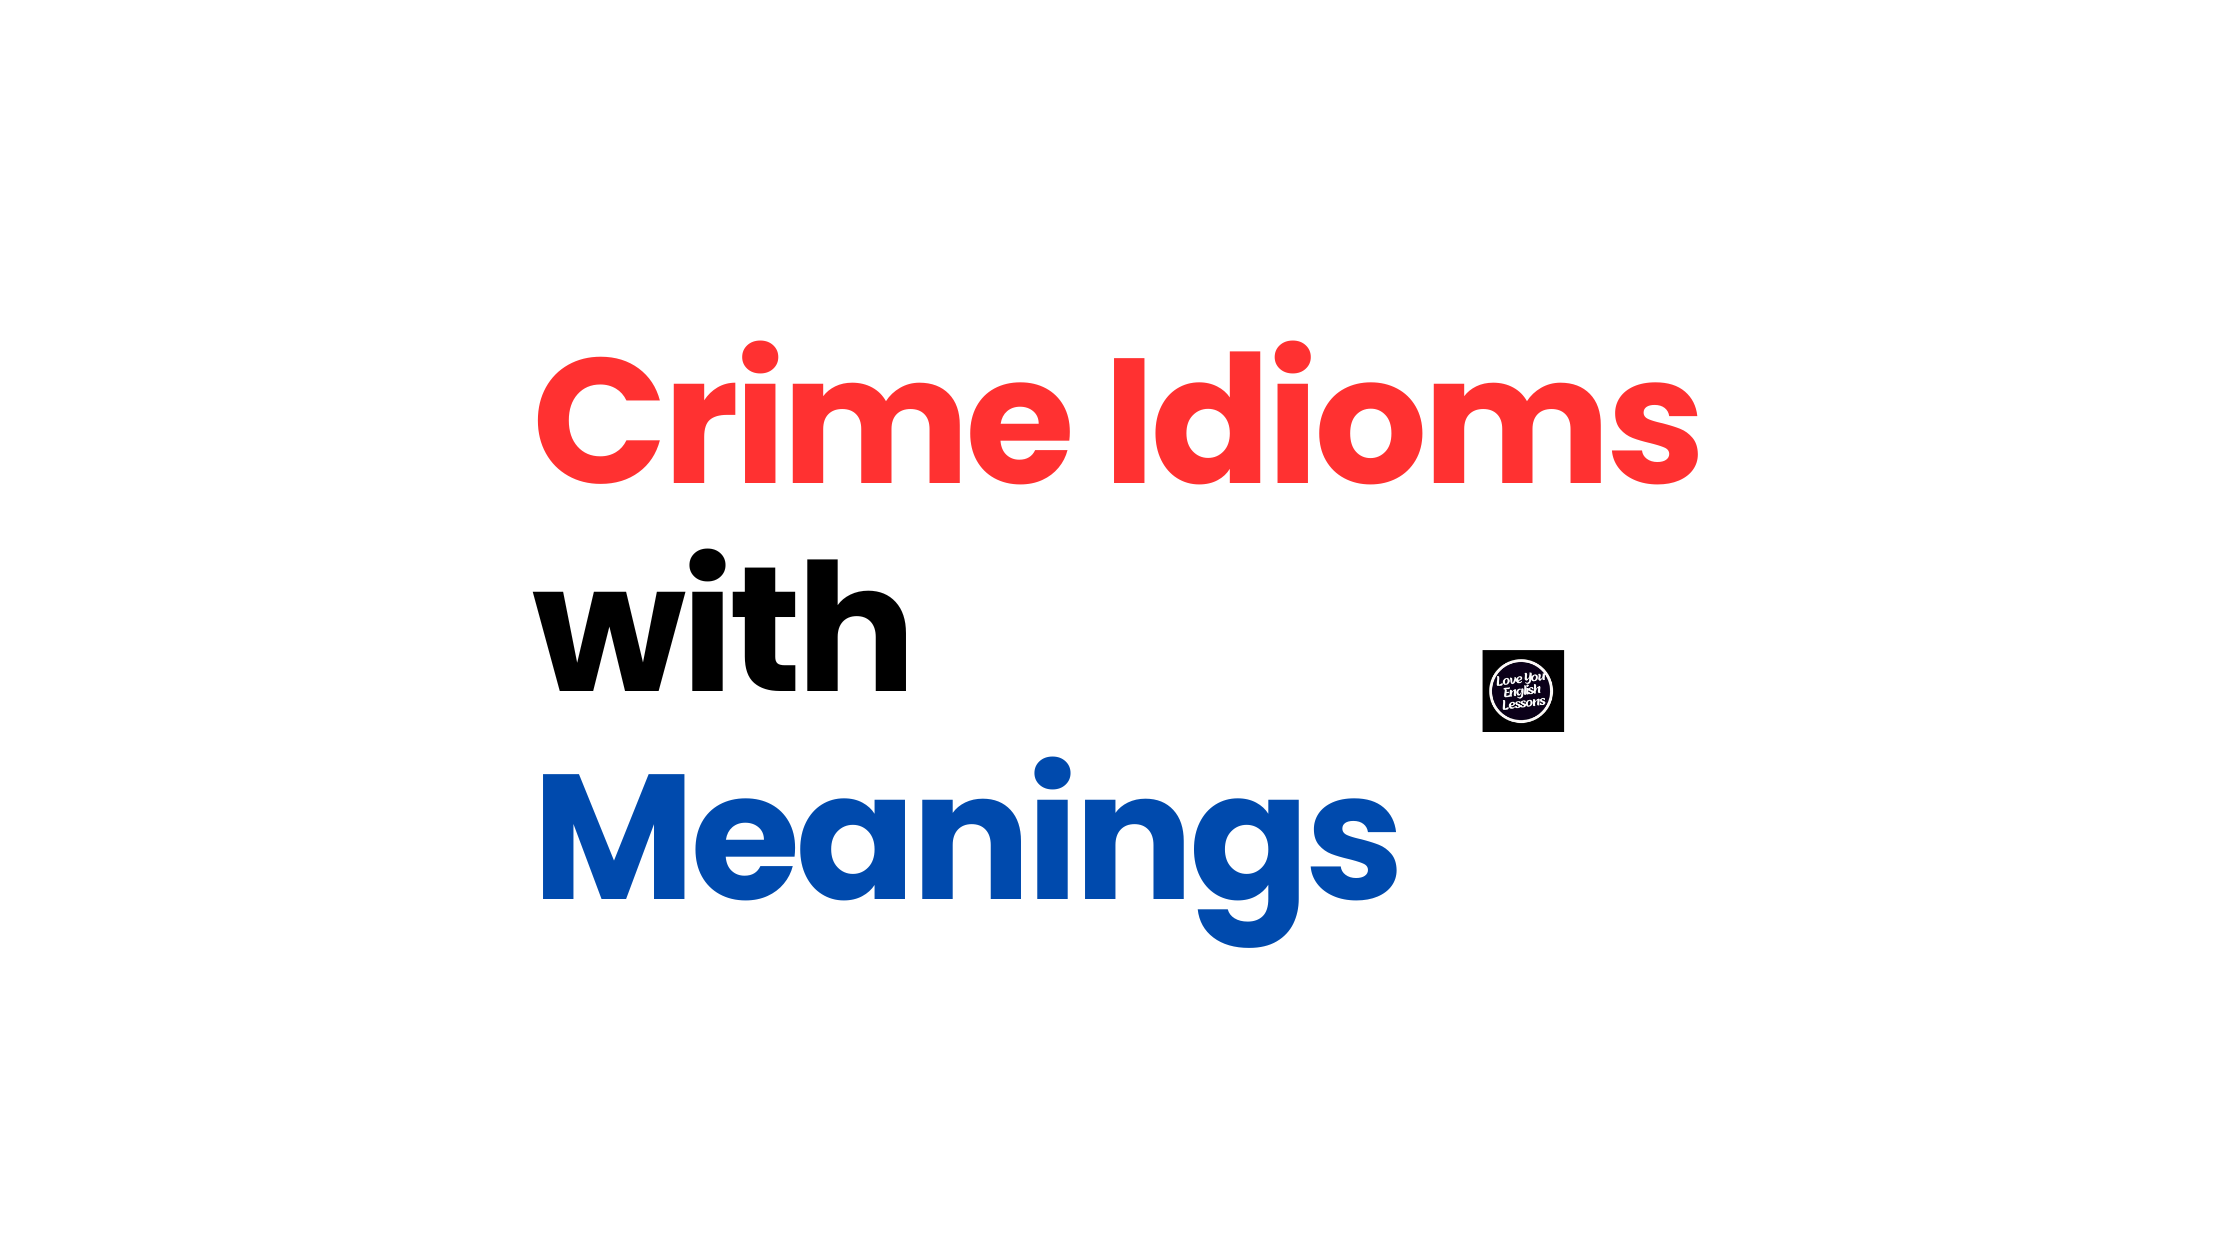 English crime idioms with meanings